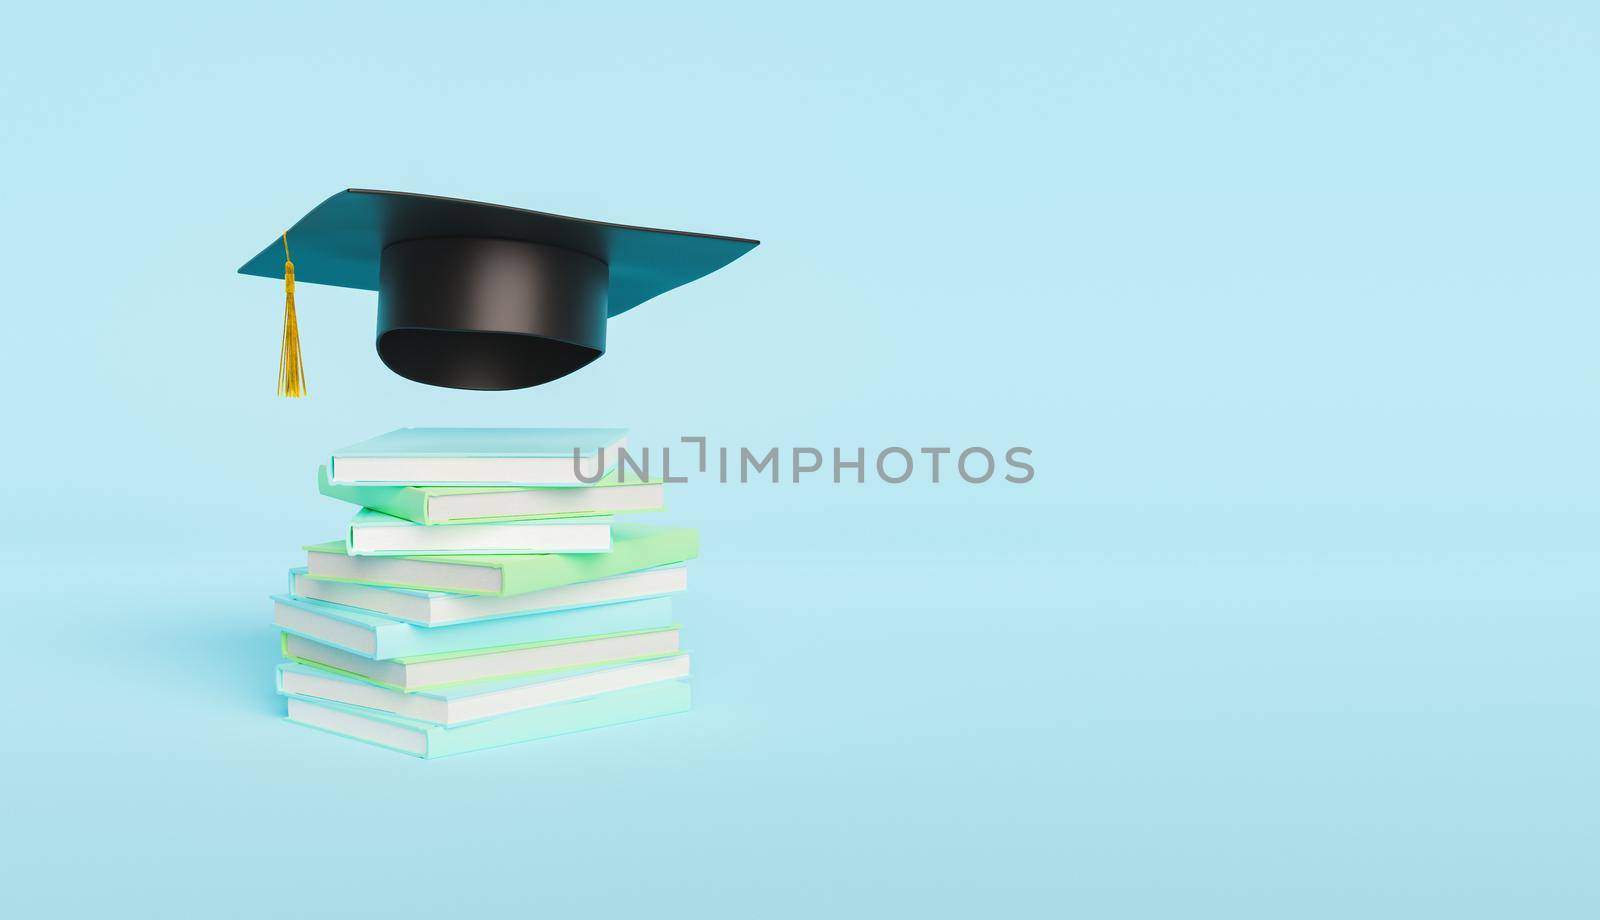 stack of books with graduation hat floating on top with pastel colors and space for text. education concept. 3d render